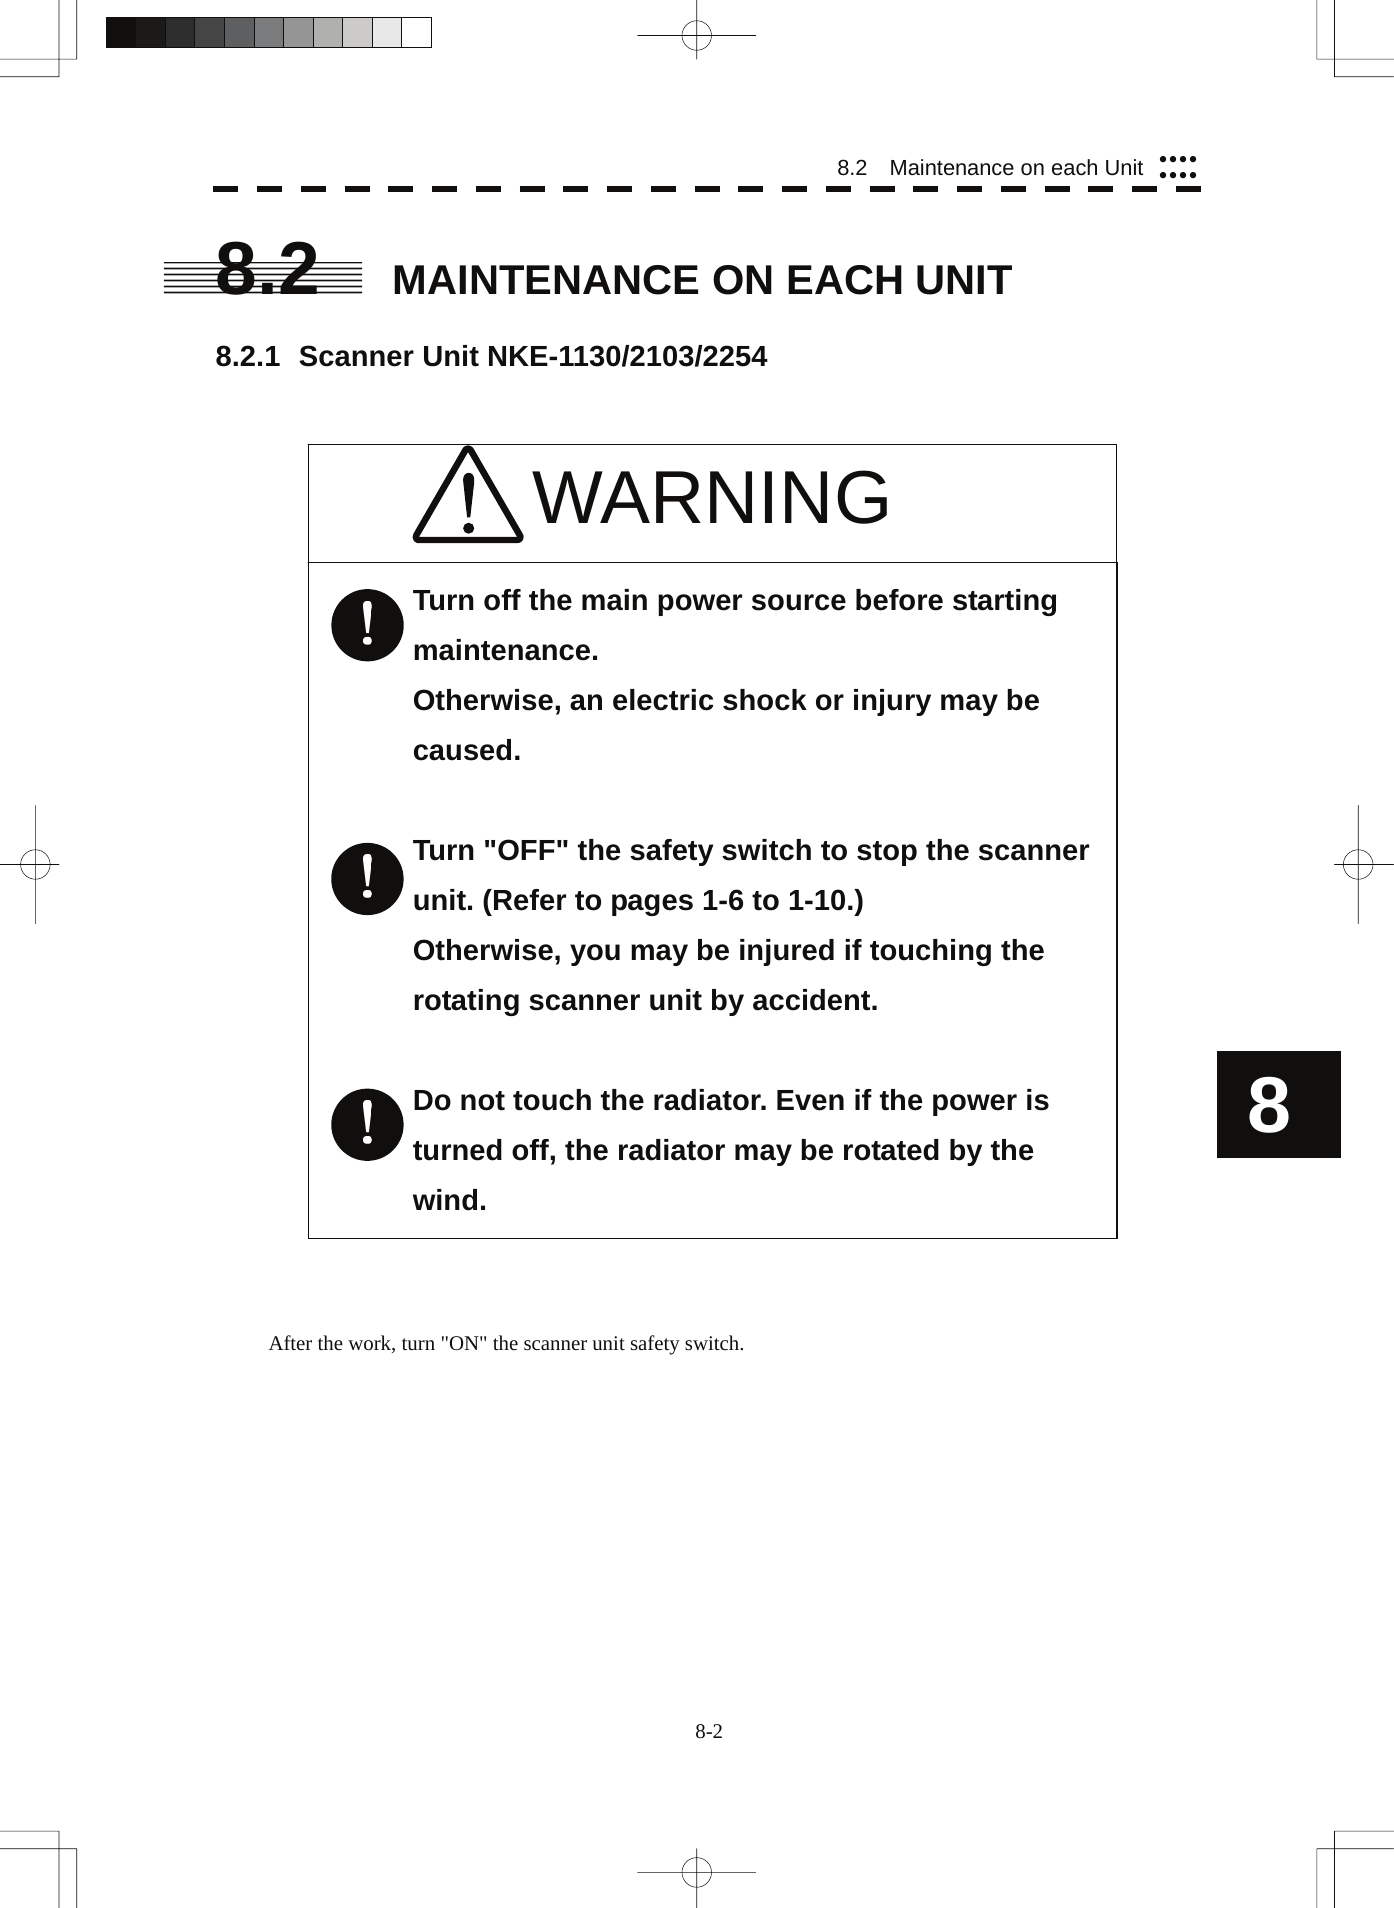  8.2    Maintenance on each Unit yyyyyyyy8.2  MAINTENANCE ON EACH UNIT  8.2.1 Scanner Unit NKE-1130/2103/2254    8 WARNING       Turn off the main power source before starting maintenance.  Otherwise, an electric shock or injury may be caused.  Turn &quot;OFF&quot; the safety switch to stop the scanner unit. (Refer to pages 1-6 to 1-10.) Otherwise, you may be injured if touching the rotating scanner unit by accident.  Do not touch the radiator. Even if the power is turned off, the radiator may be rotated by the wind.                               After the work, turn &quot;ON&quot; the scanner unit safety switch. 8-2 